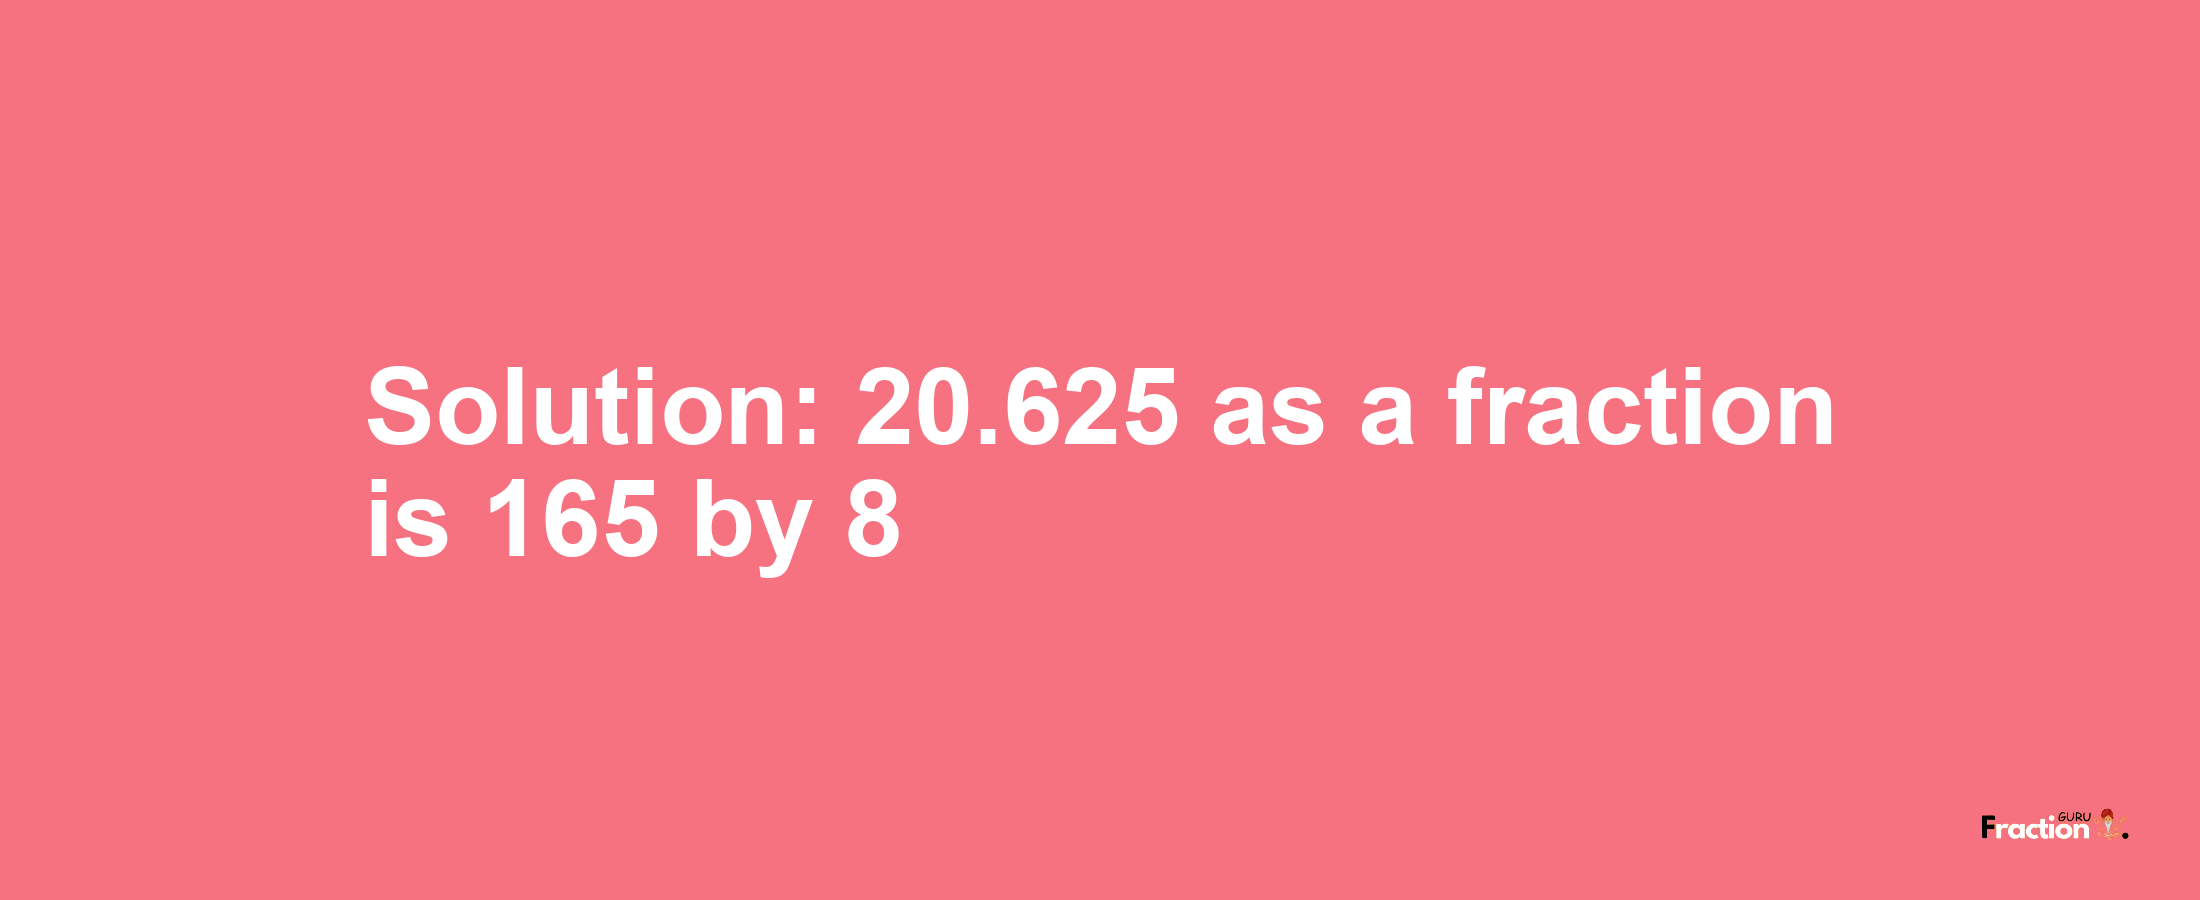 Solution:20.625 as a fraction is 165/8